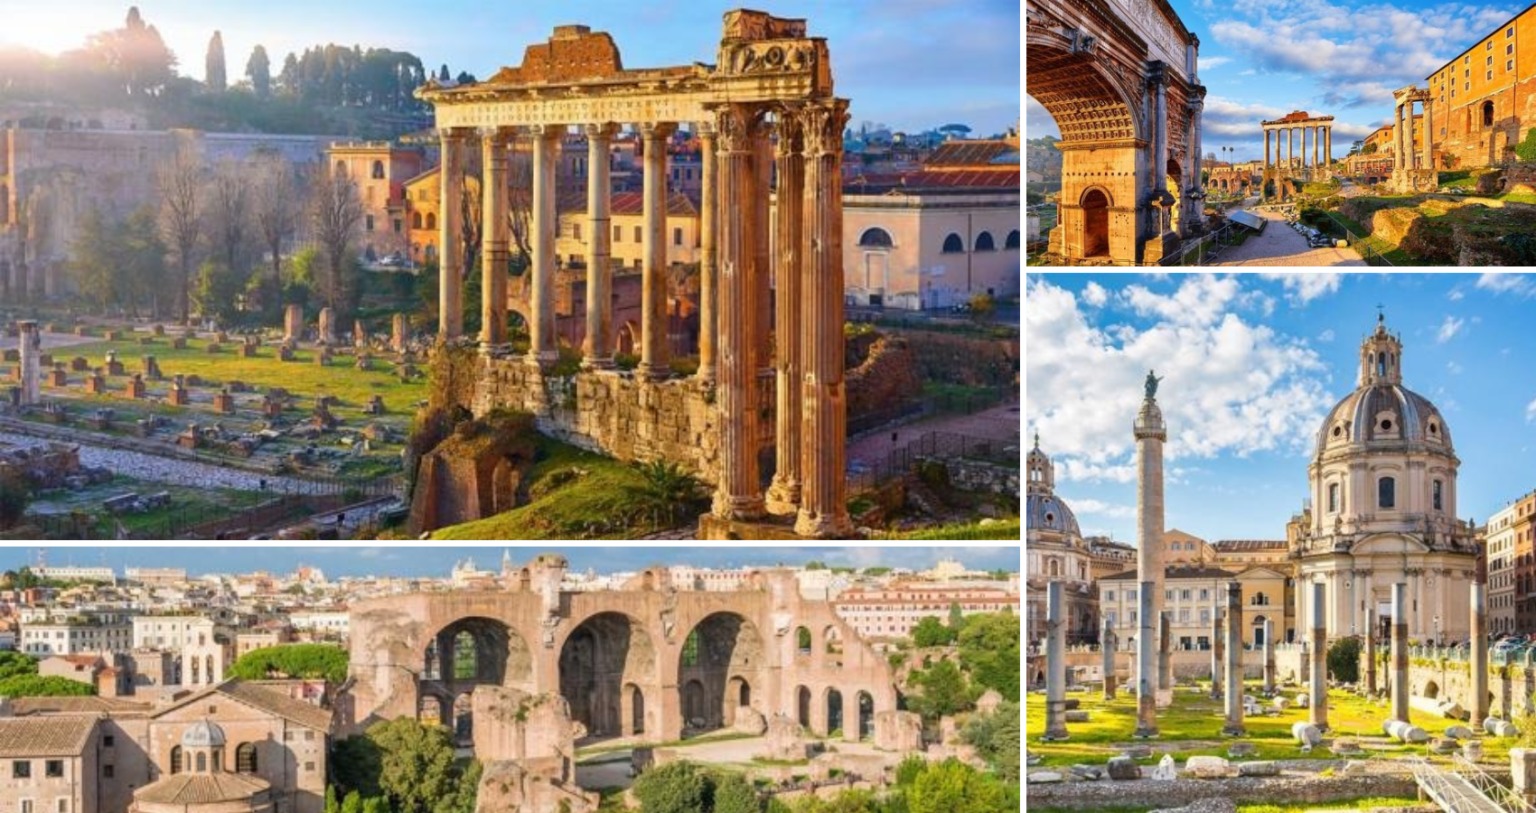 The Forum: Epicenter of the Mighty Roman Empire